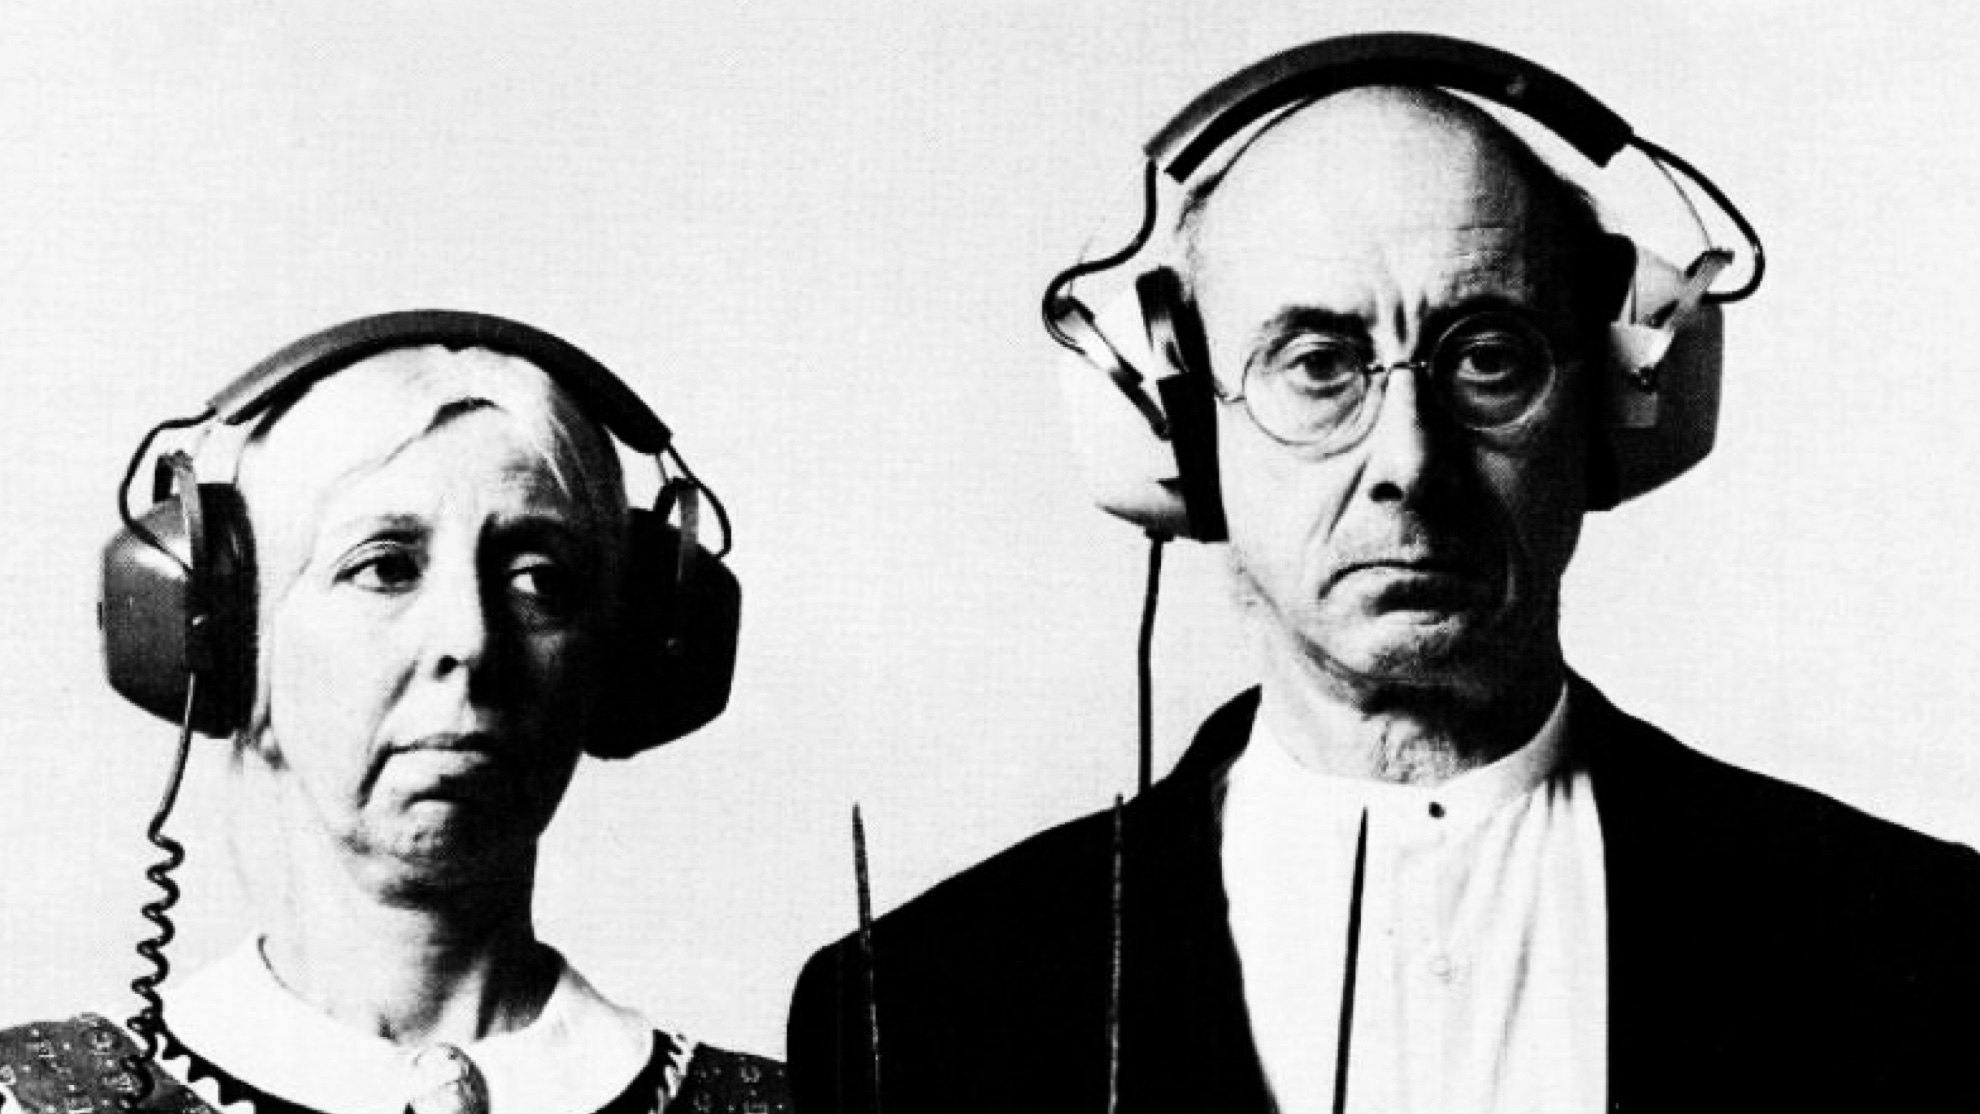 197s RCA ad showing two people wearing headphones